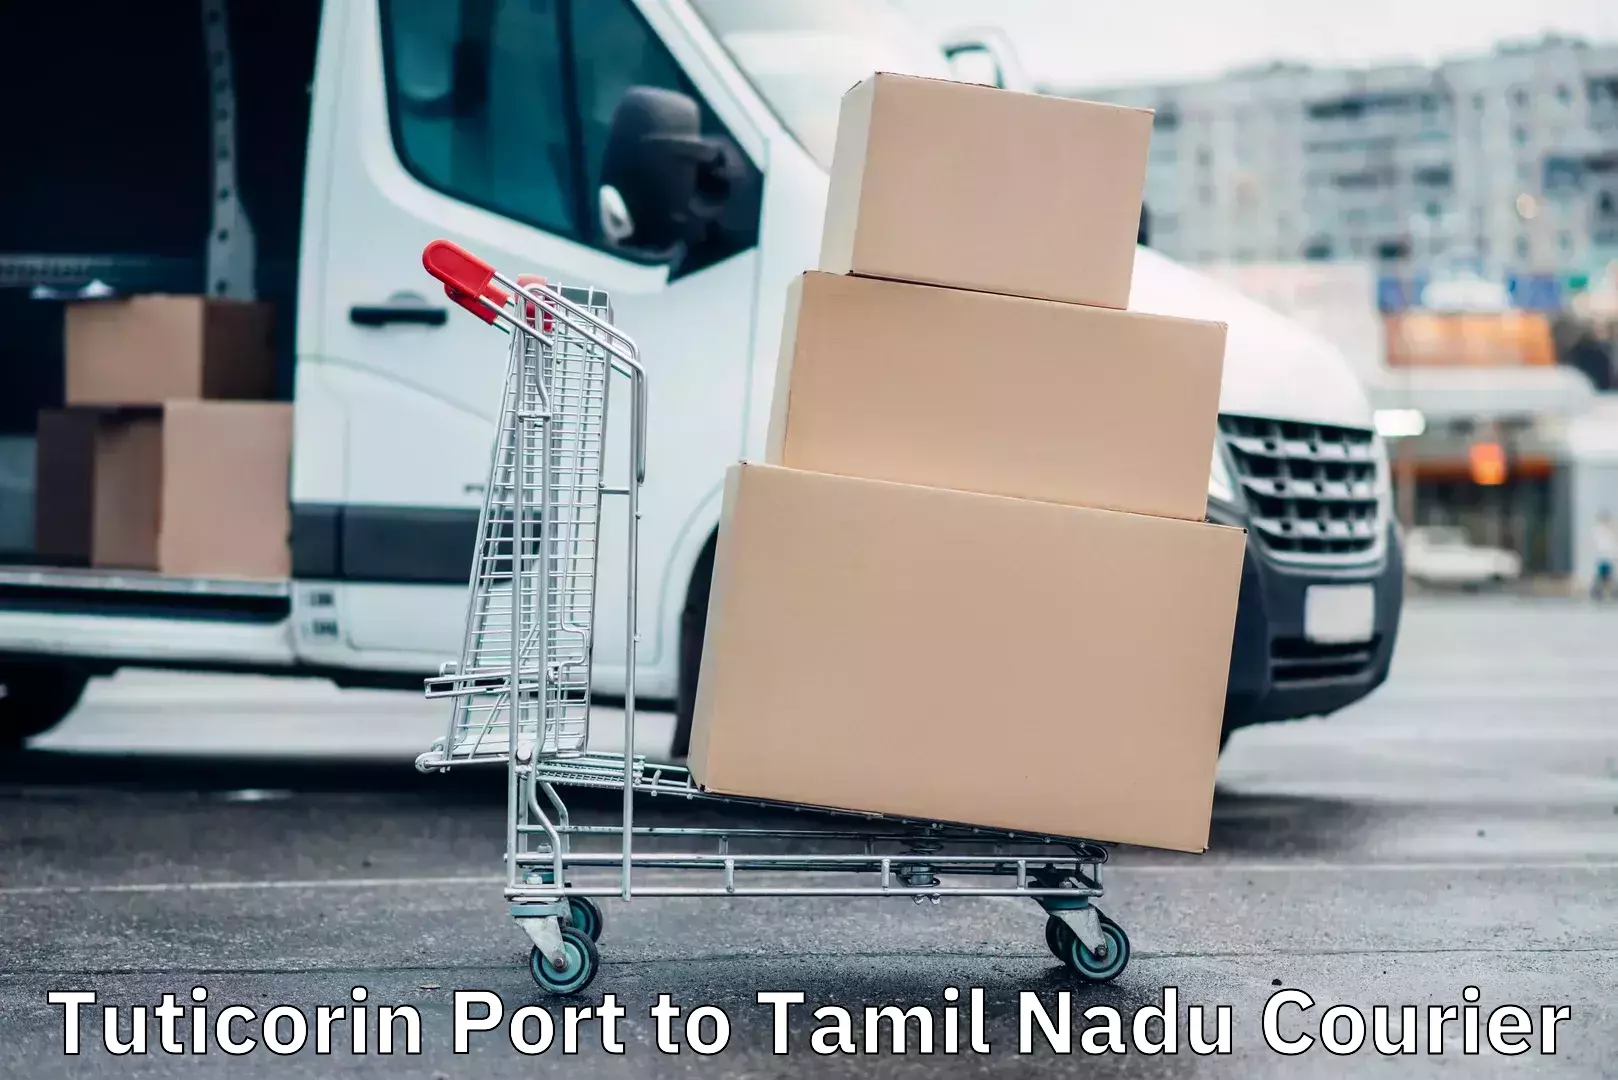 Nationwide shipping services Tuticorin Port to Tamil Nadu